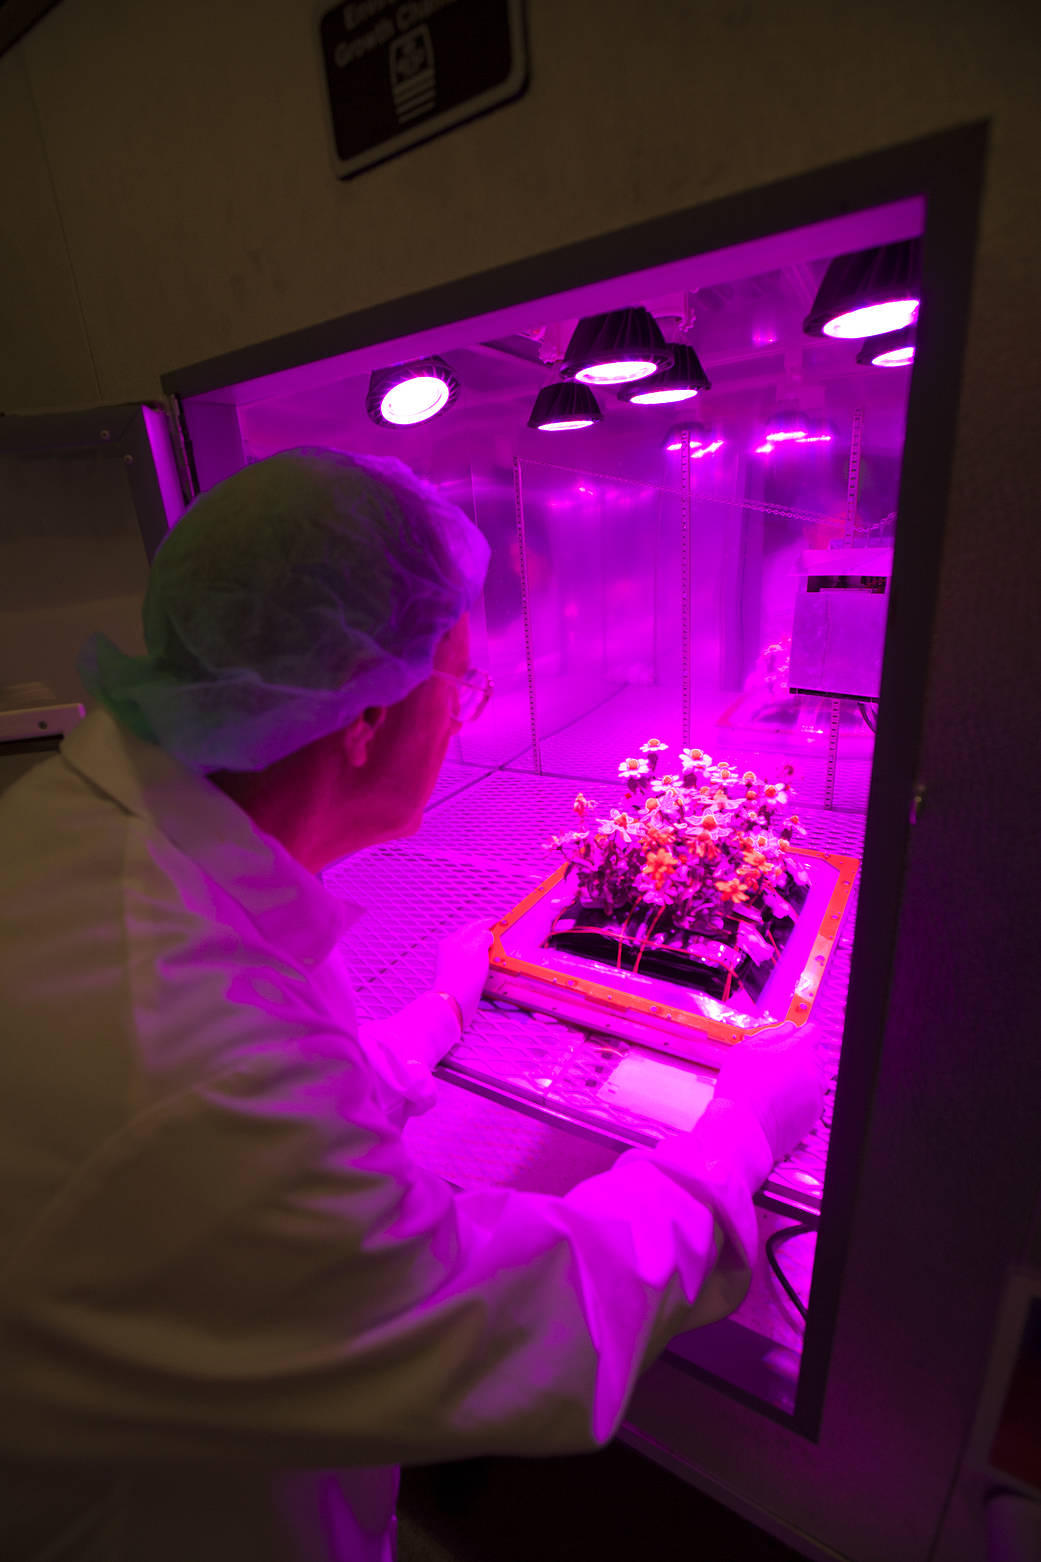 The base tray containing zinnias is removed from a controlled environment chamber.